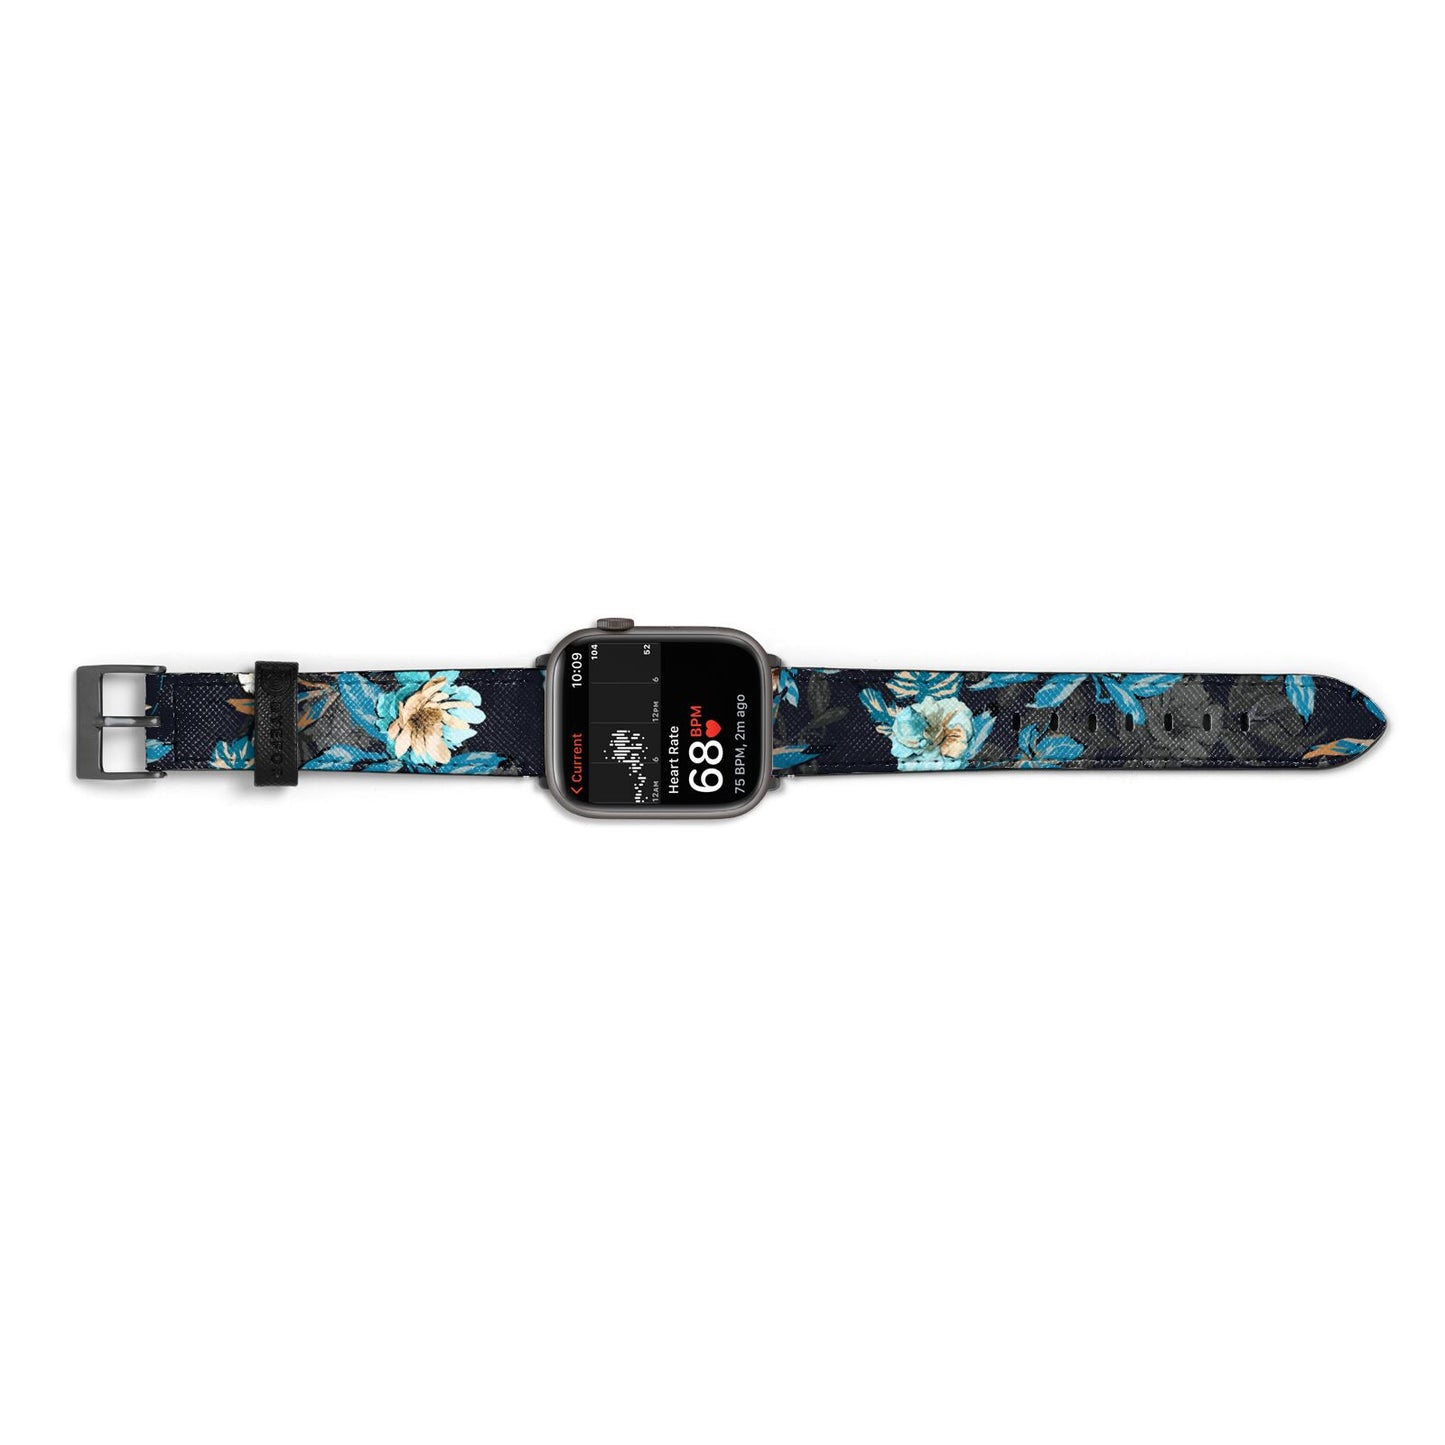 Blossom Flowers Apple Watch Strap Size 38mm Landscape Image Space Grey Hardware